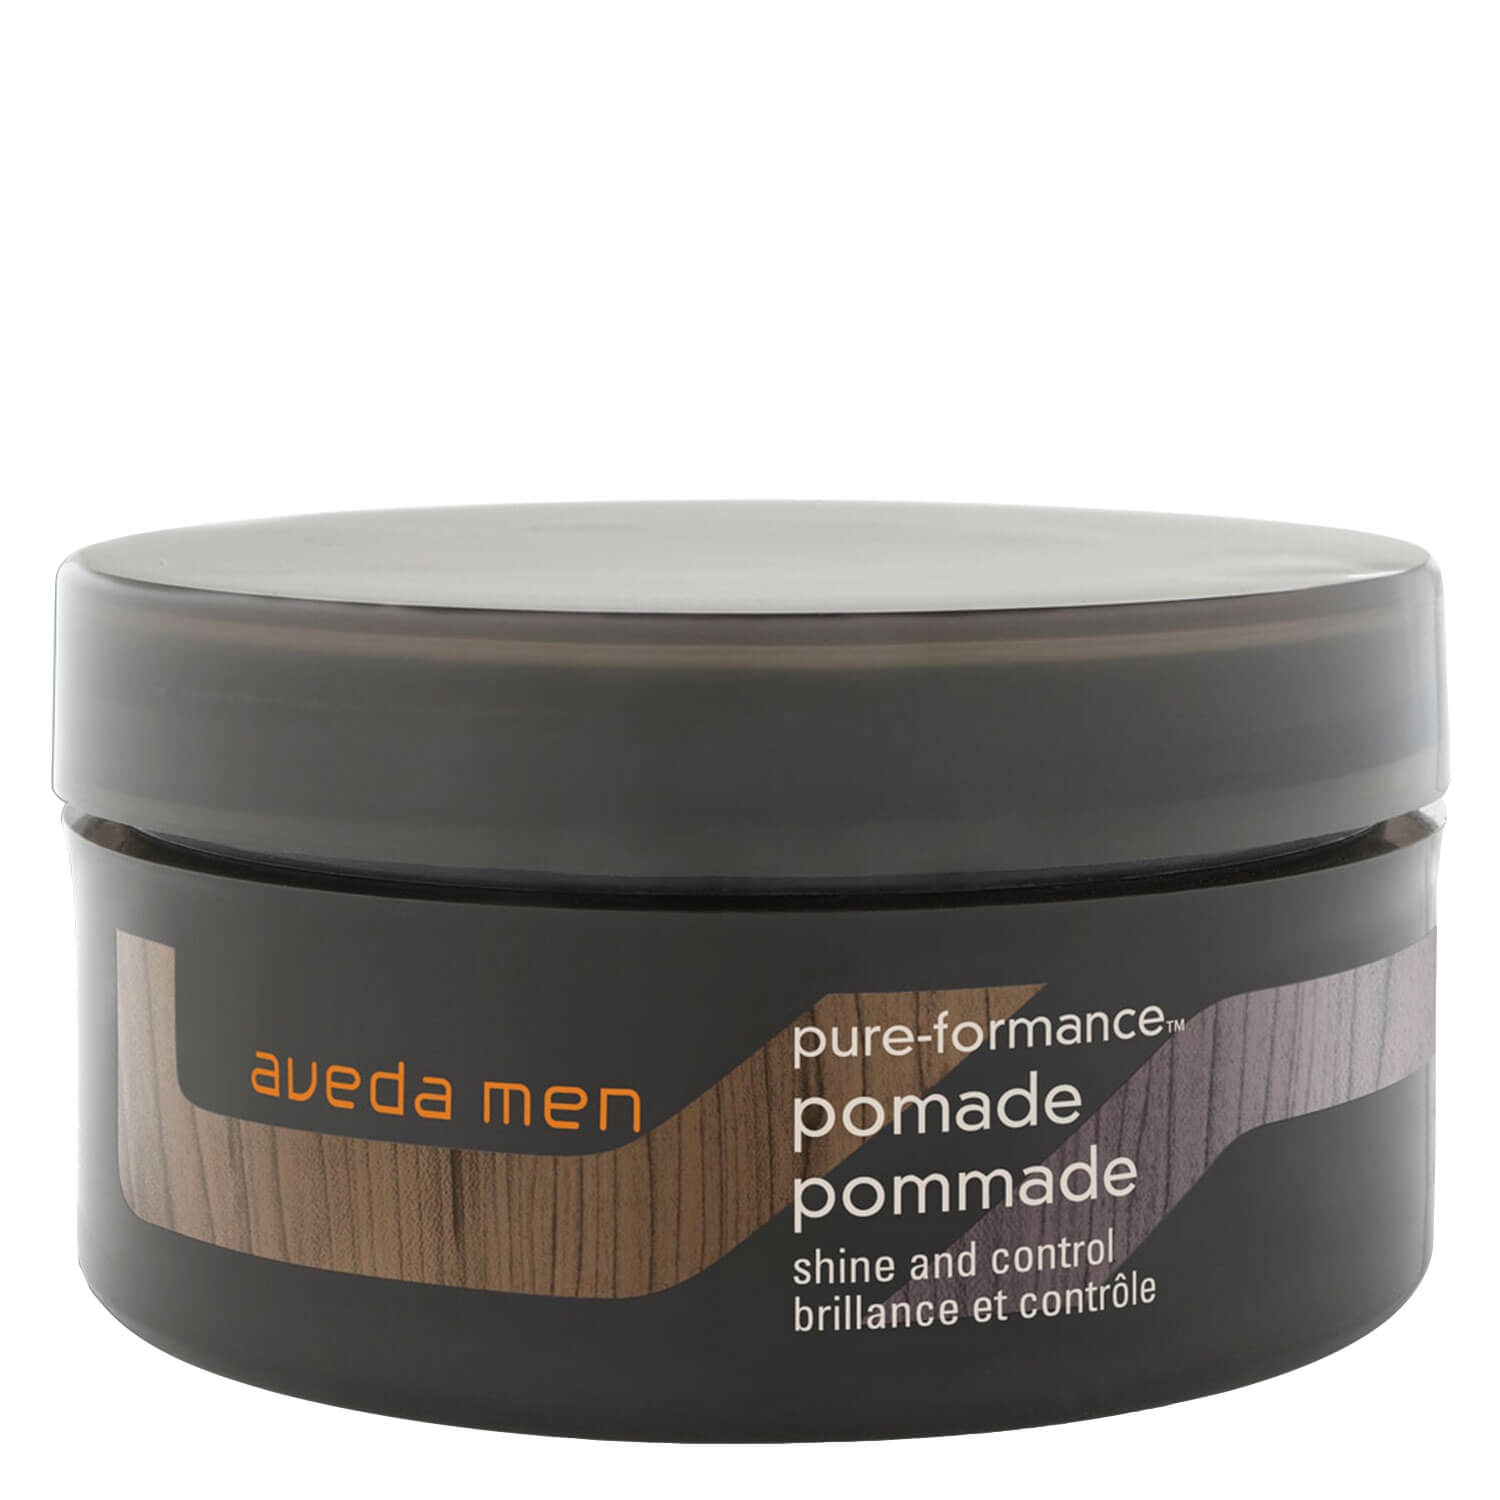 Product image from men pure-formance - pomade